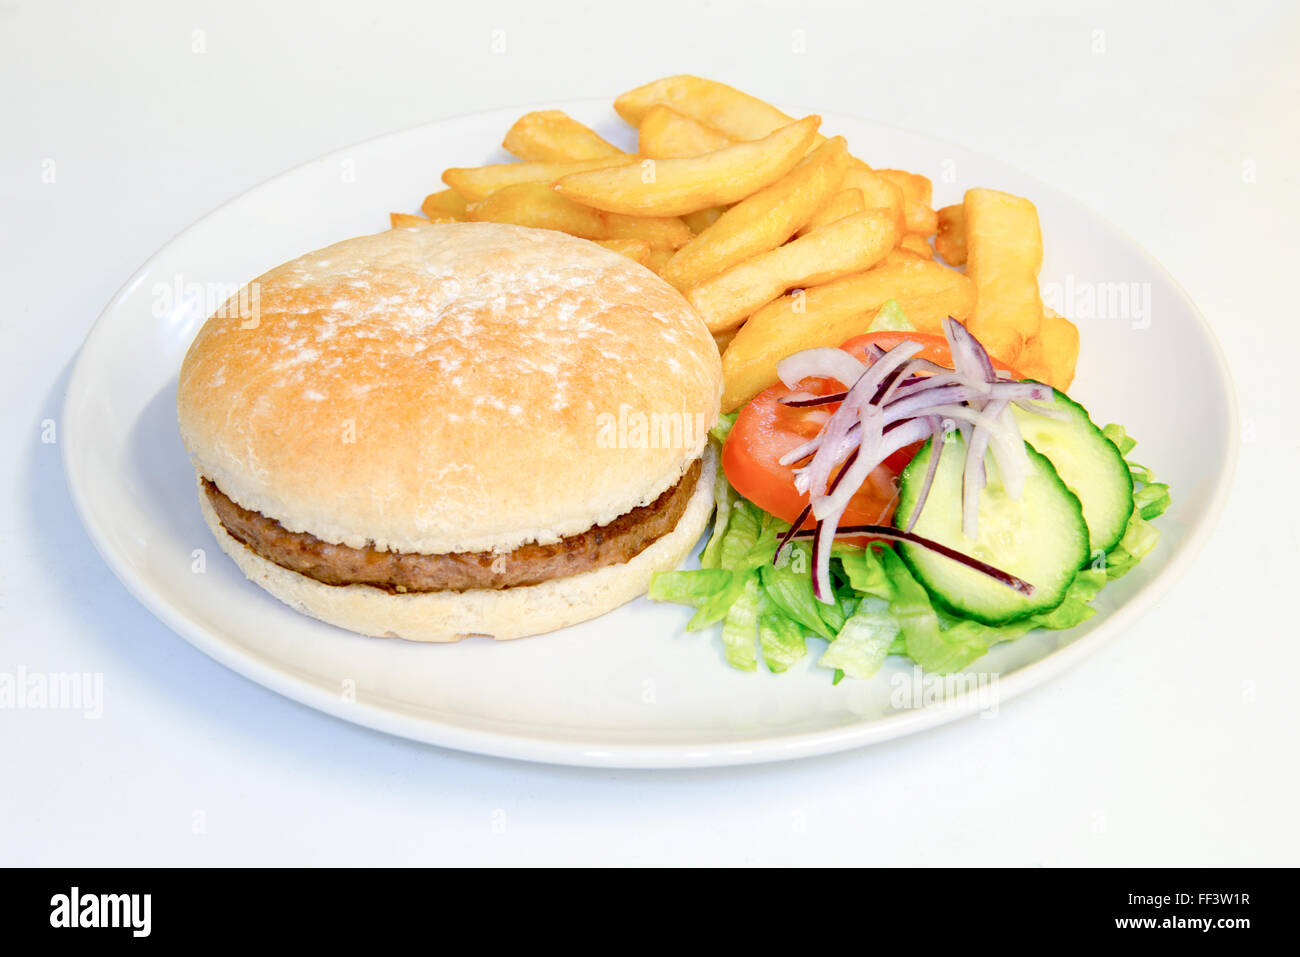 Meat burger meal in a bun with chips and salad Stock Photo